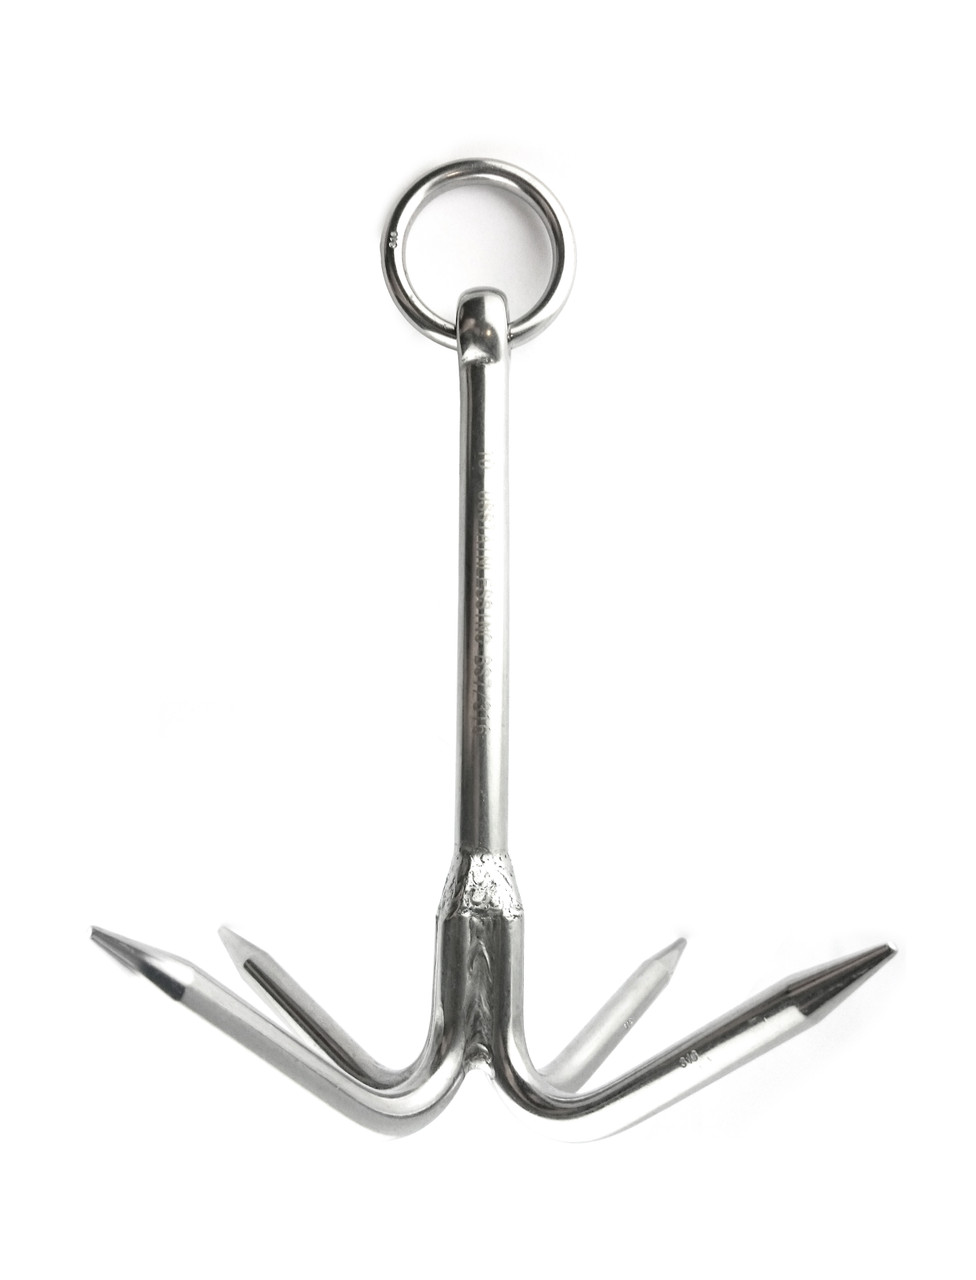 Stainless Steel 316 Hook Anchor 15 (375mm) Marine Grade Grapple Grappling  Hook - US Stainless